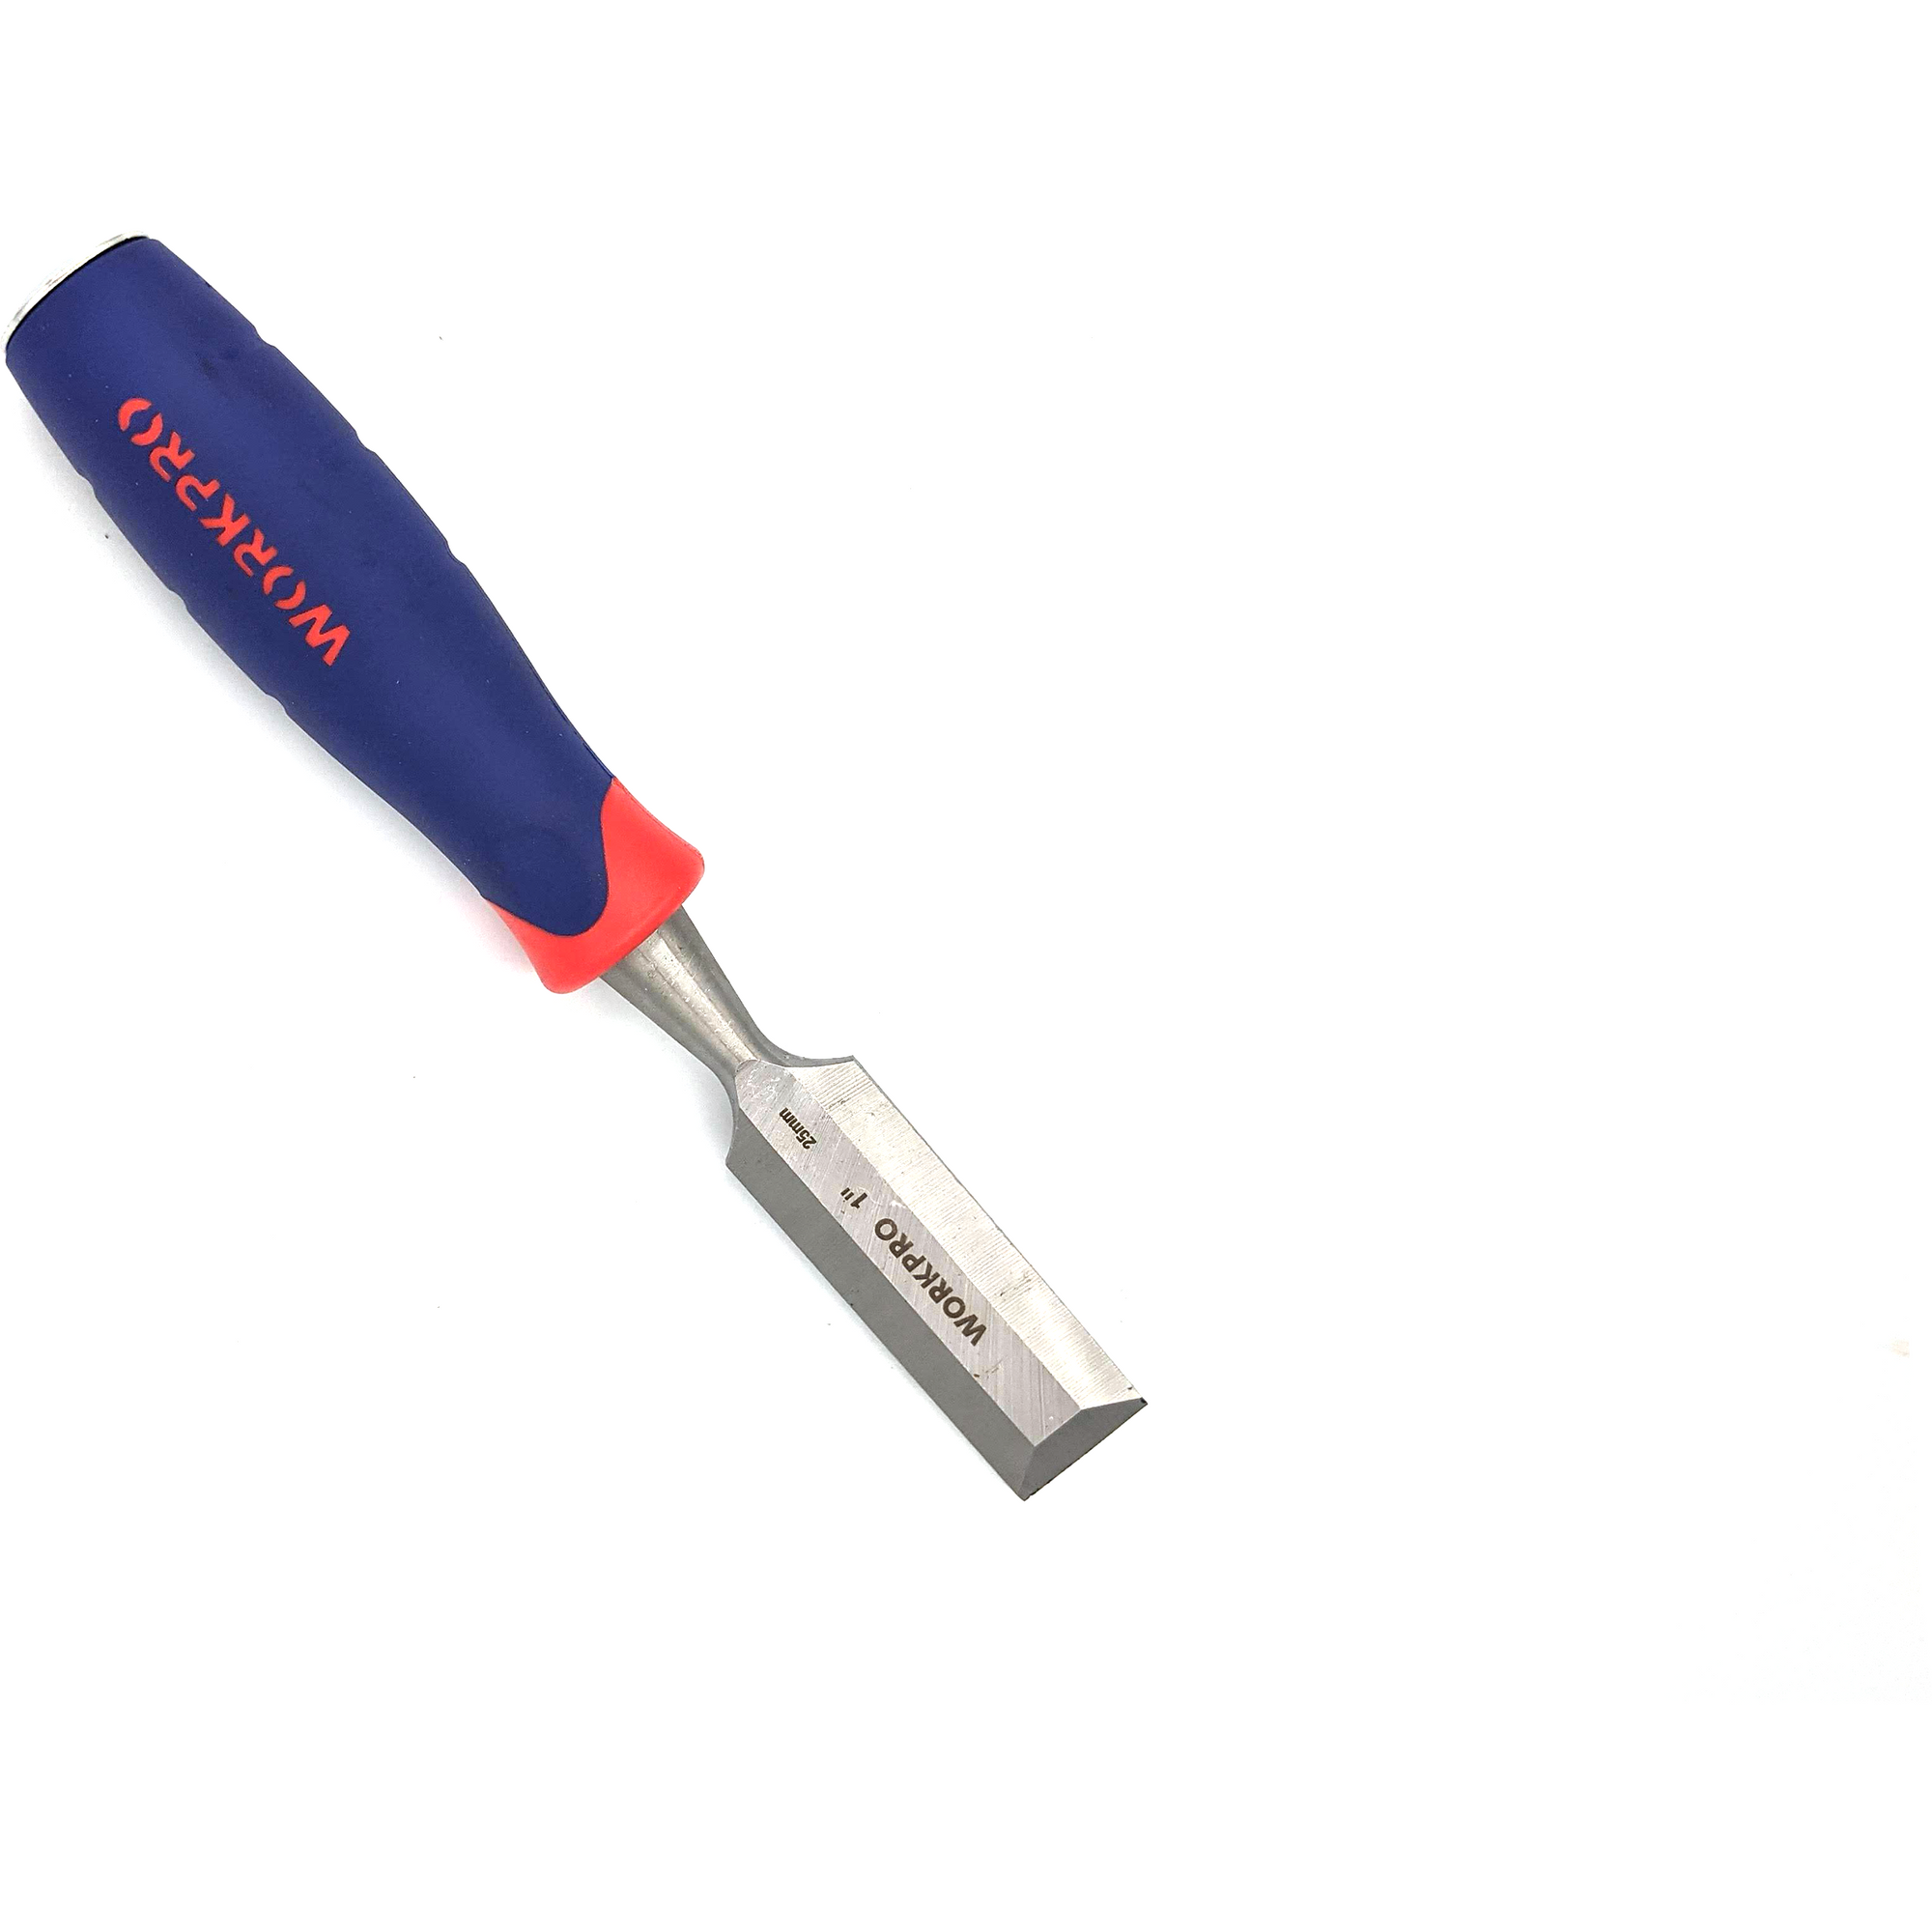 Workpro Wood Chisel 1.1-4Inch